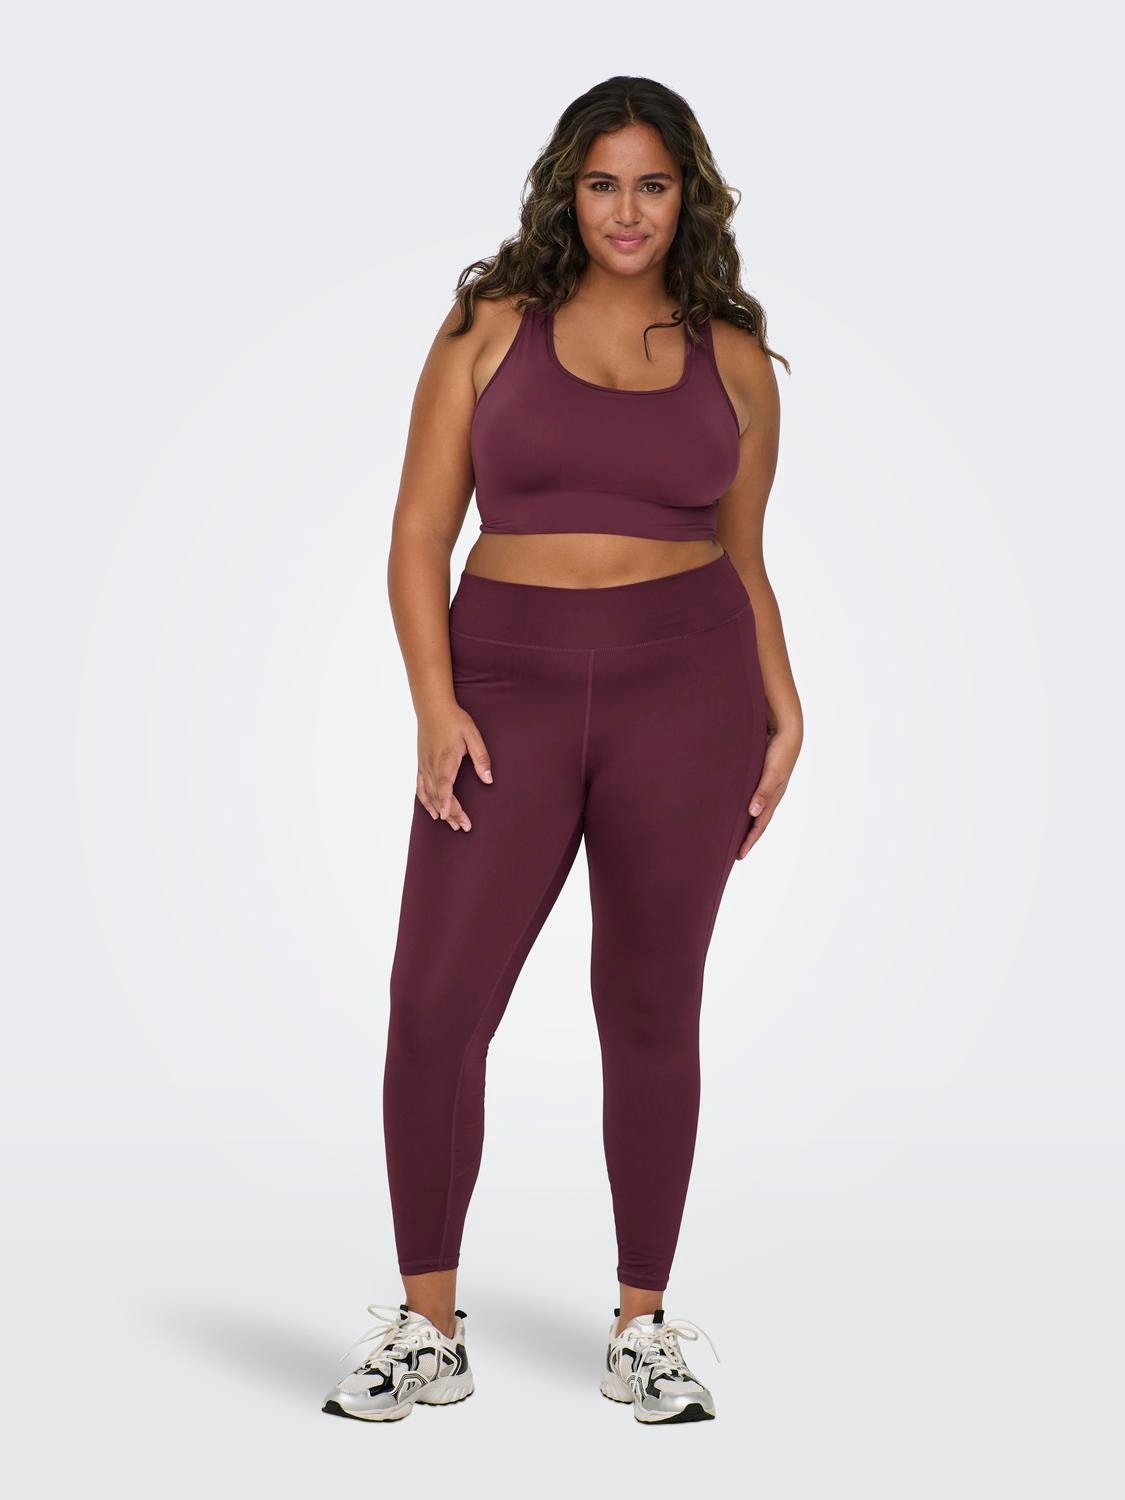 https://images.only.com/15200911/4239810/005/only-curvyseamlesssportsbra-purple.jpg?v=55bcc5b05ec90775ad9bd2d86f3d13cc&format=webp&width=1280&quality=90&key=25-0-3